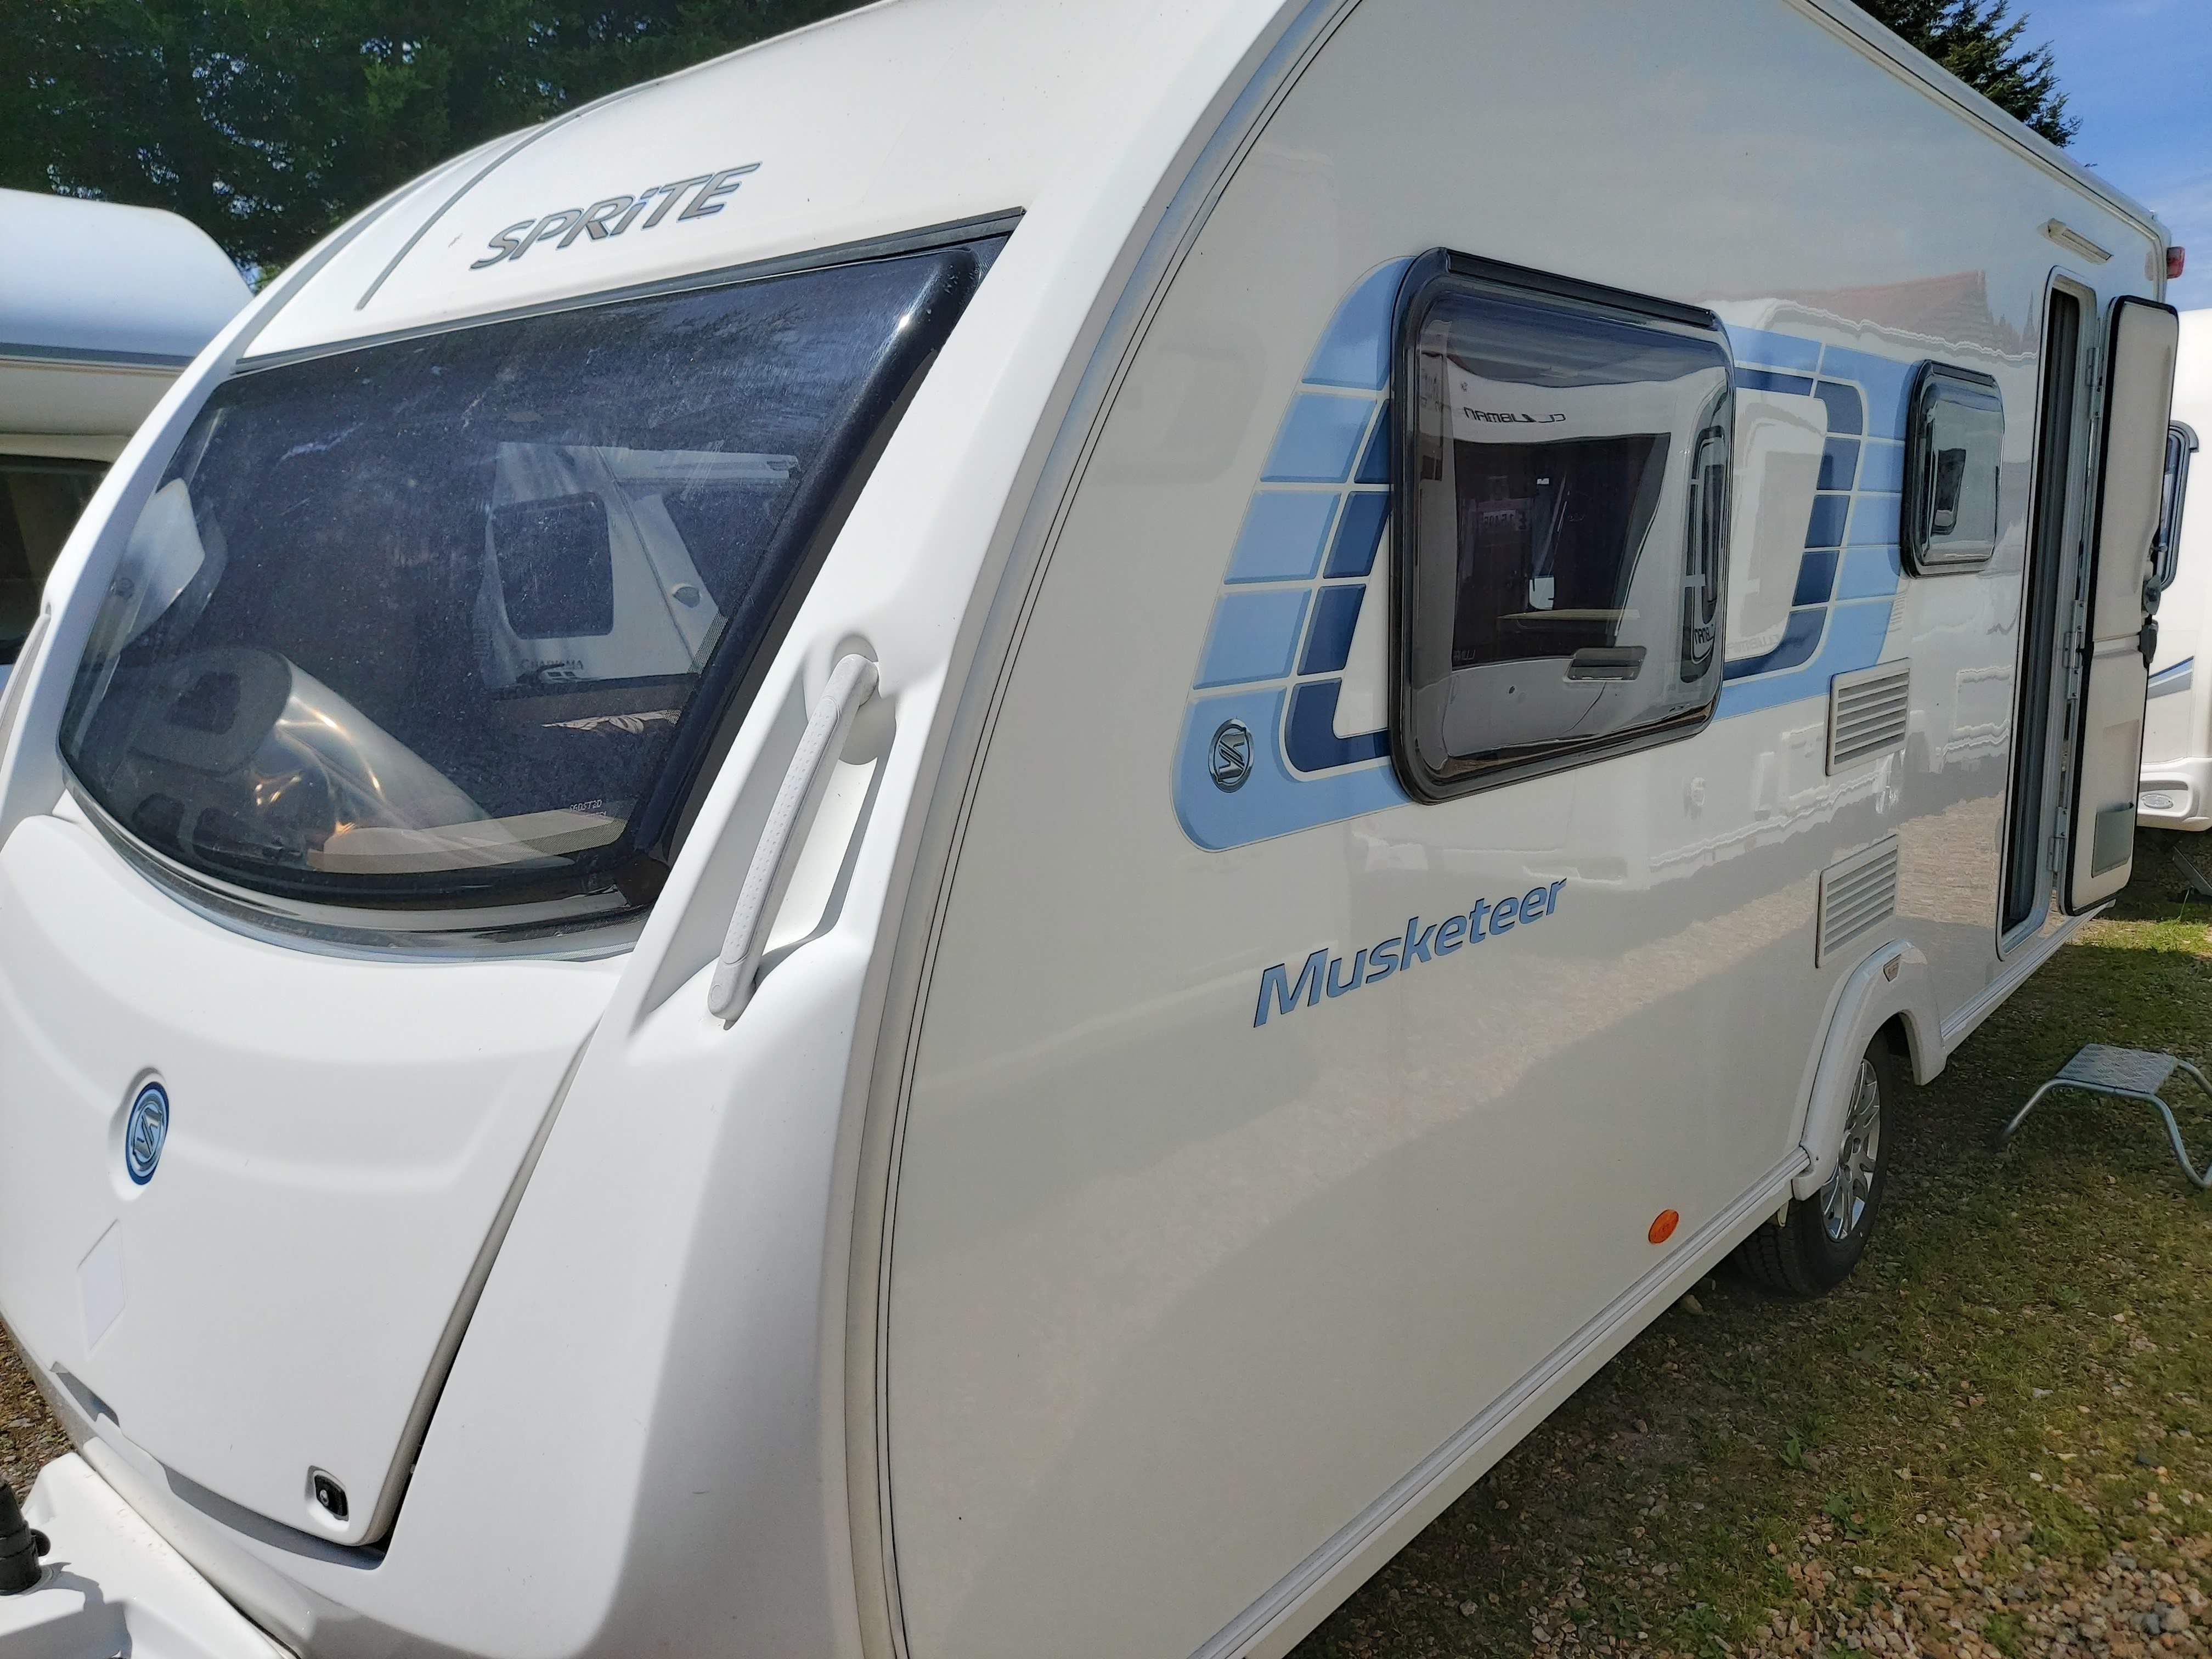 NOW SOLD 2012 Sprite Musketeer EB 4 Berth Rear Bunks Lightweight Caravan Motor Mover, Awning